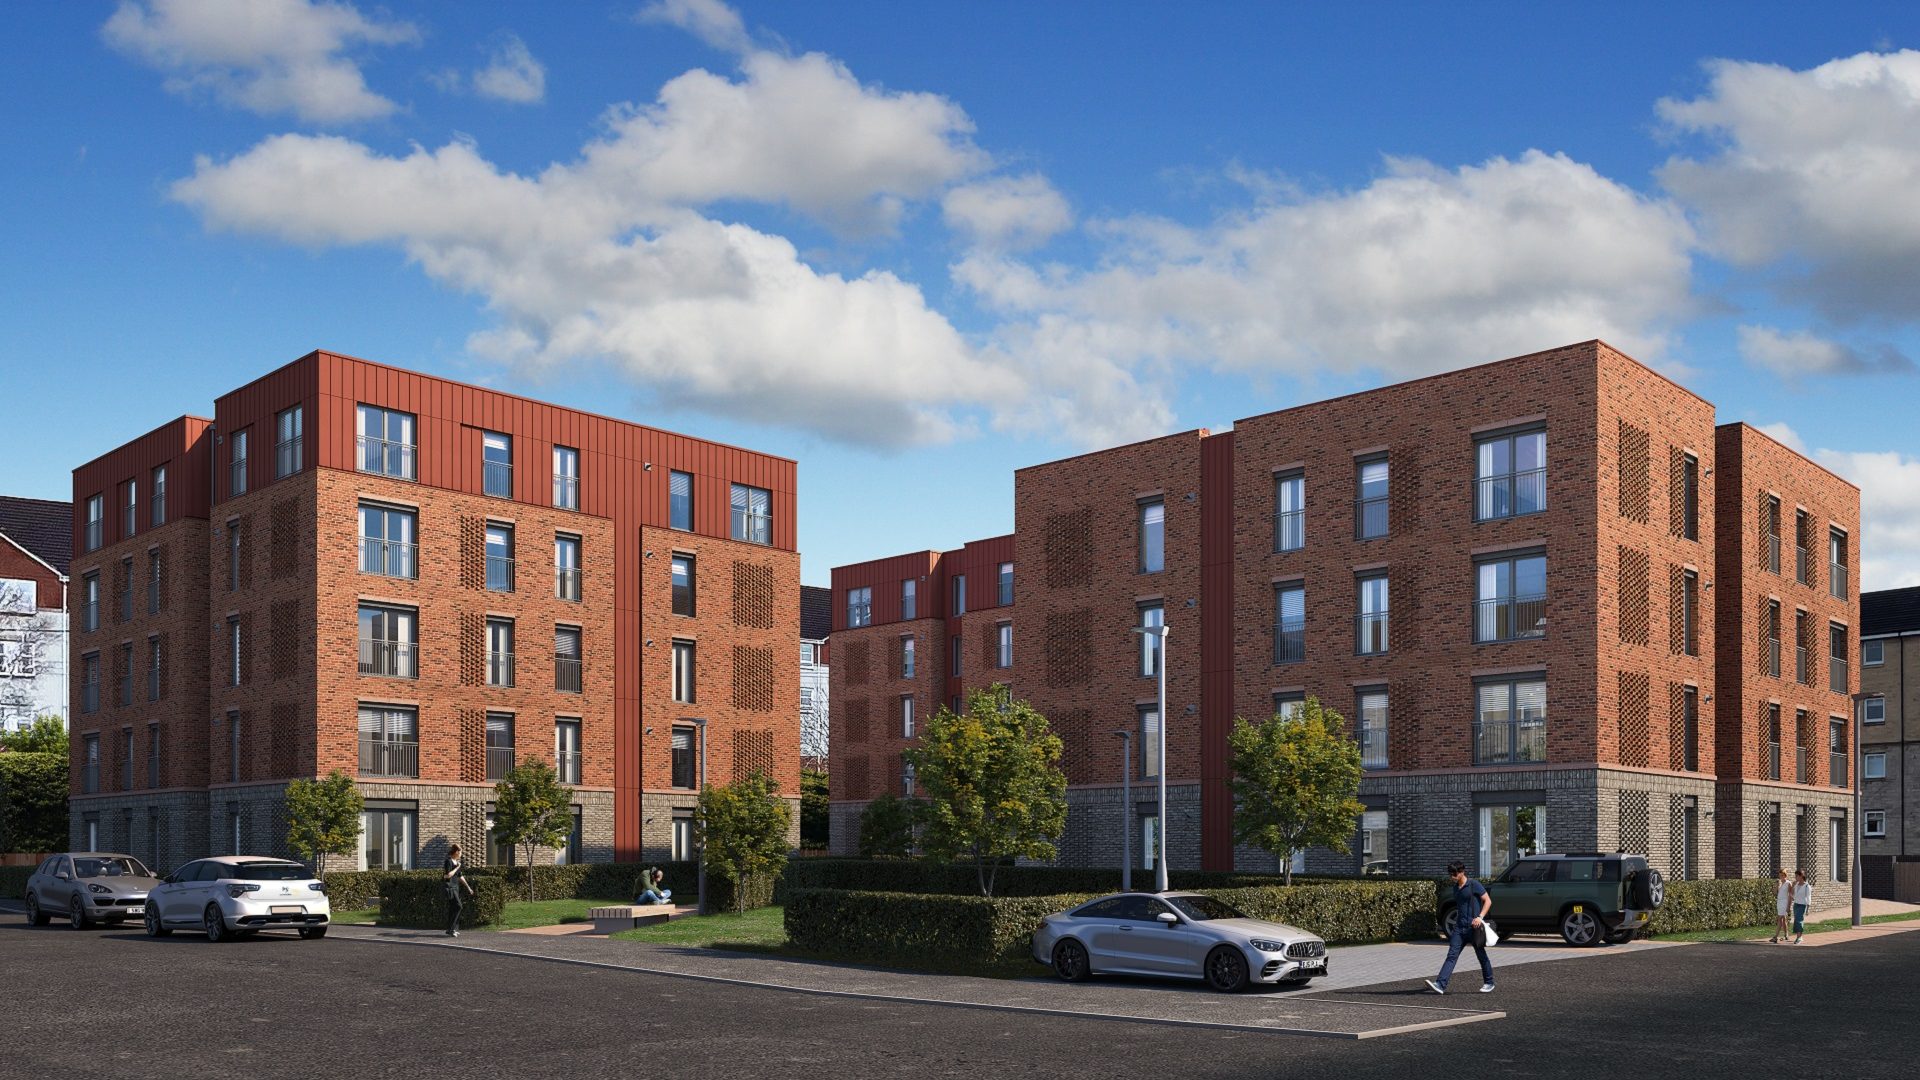 Ascent Cathcart. 55, one and 2 bed apartments in Cathcart Glasgow